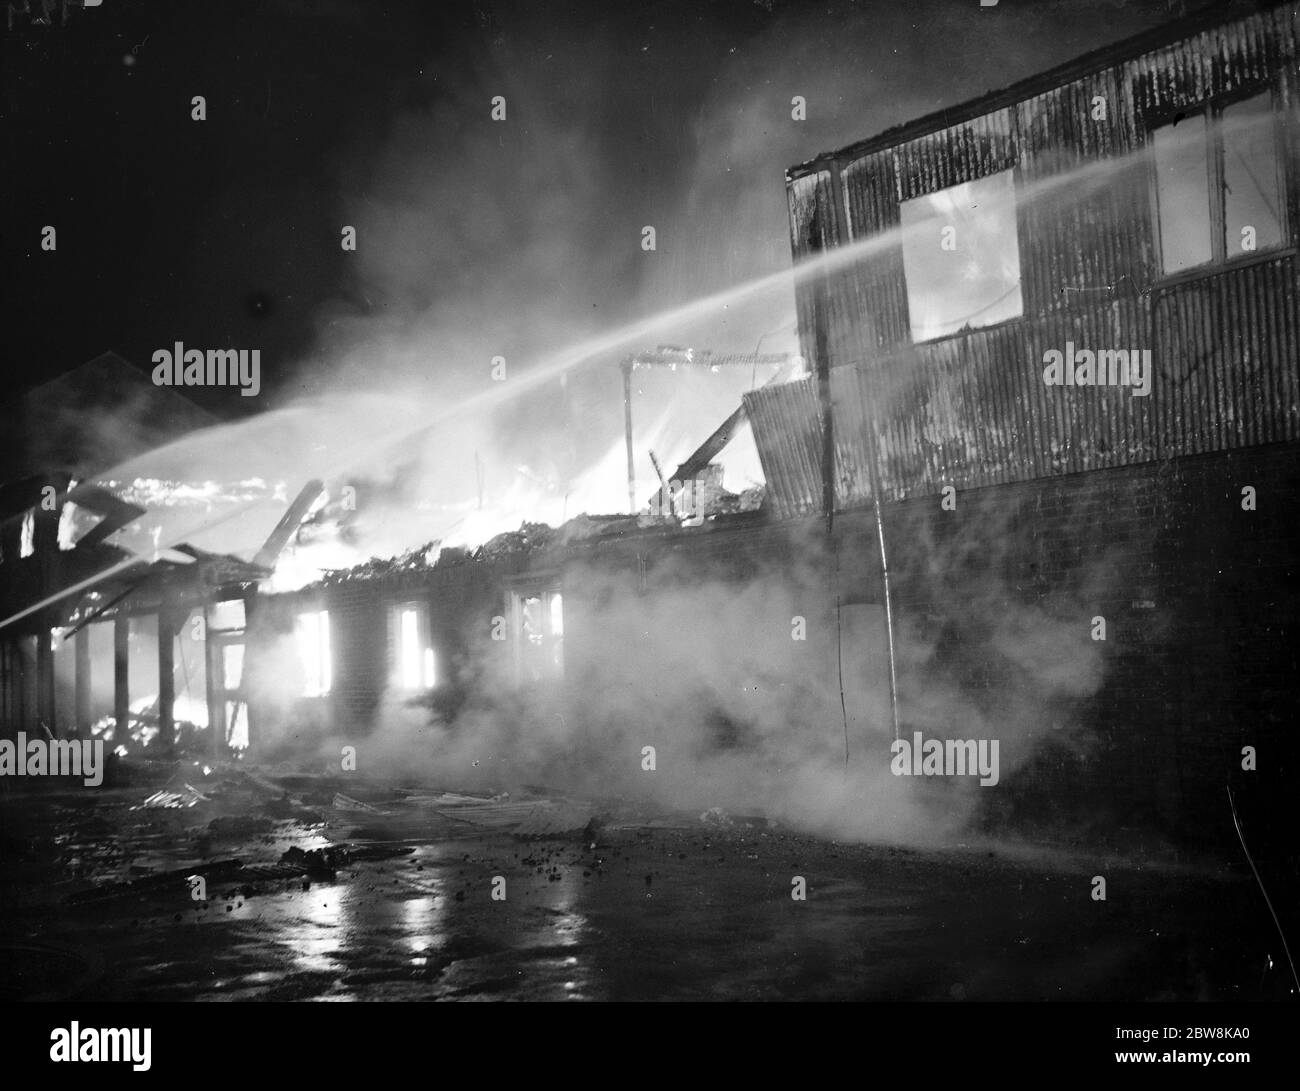 Fire , Halls , Dartford . Fire hoses being trained on the burning building . 1937 Stock Photo